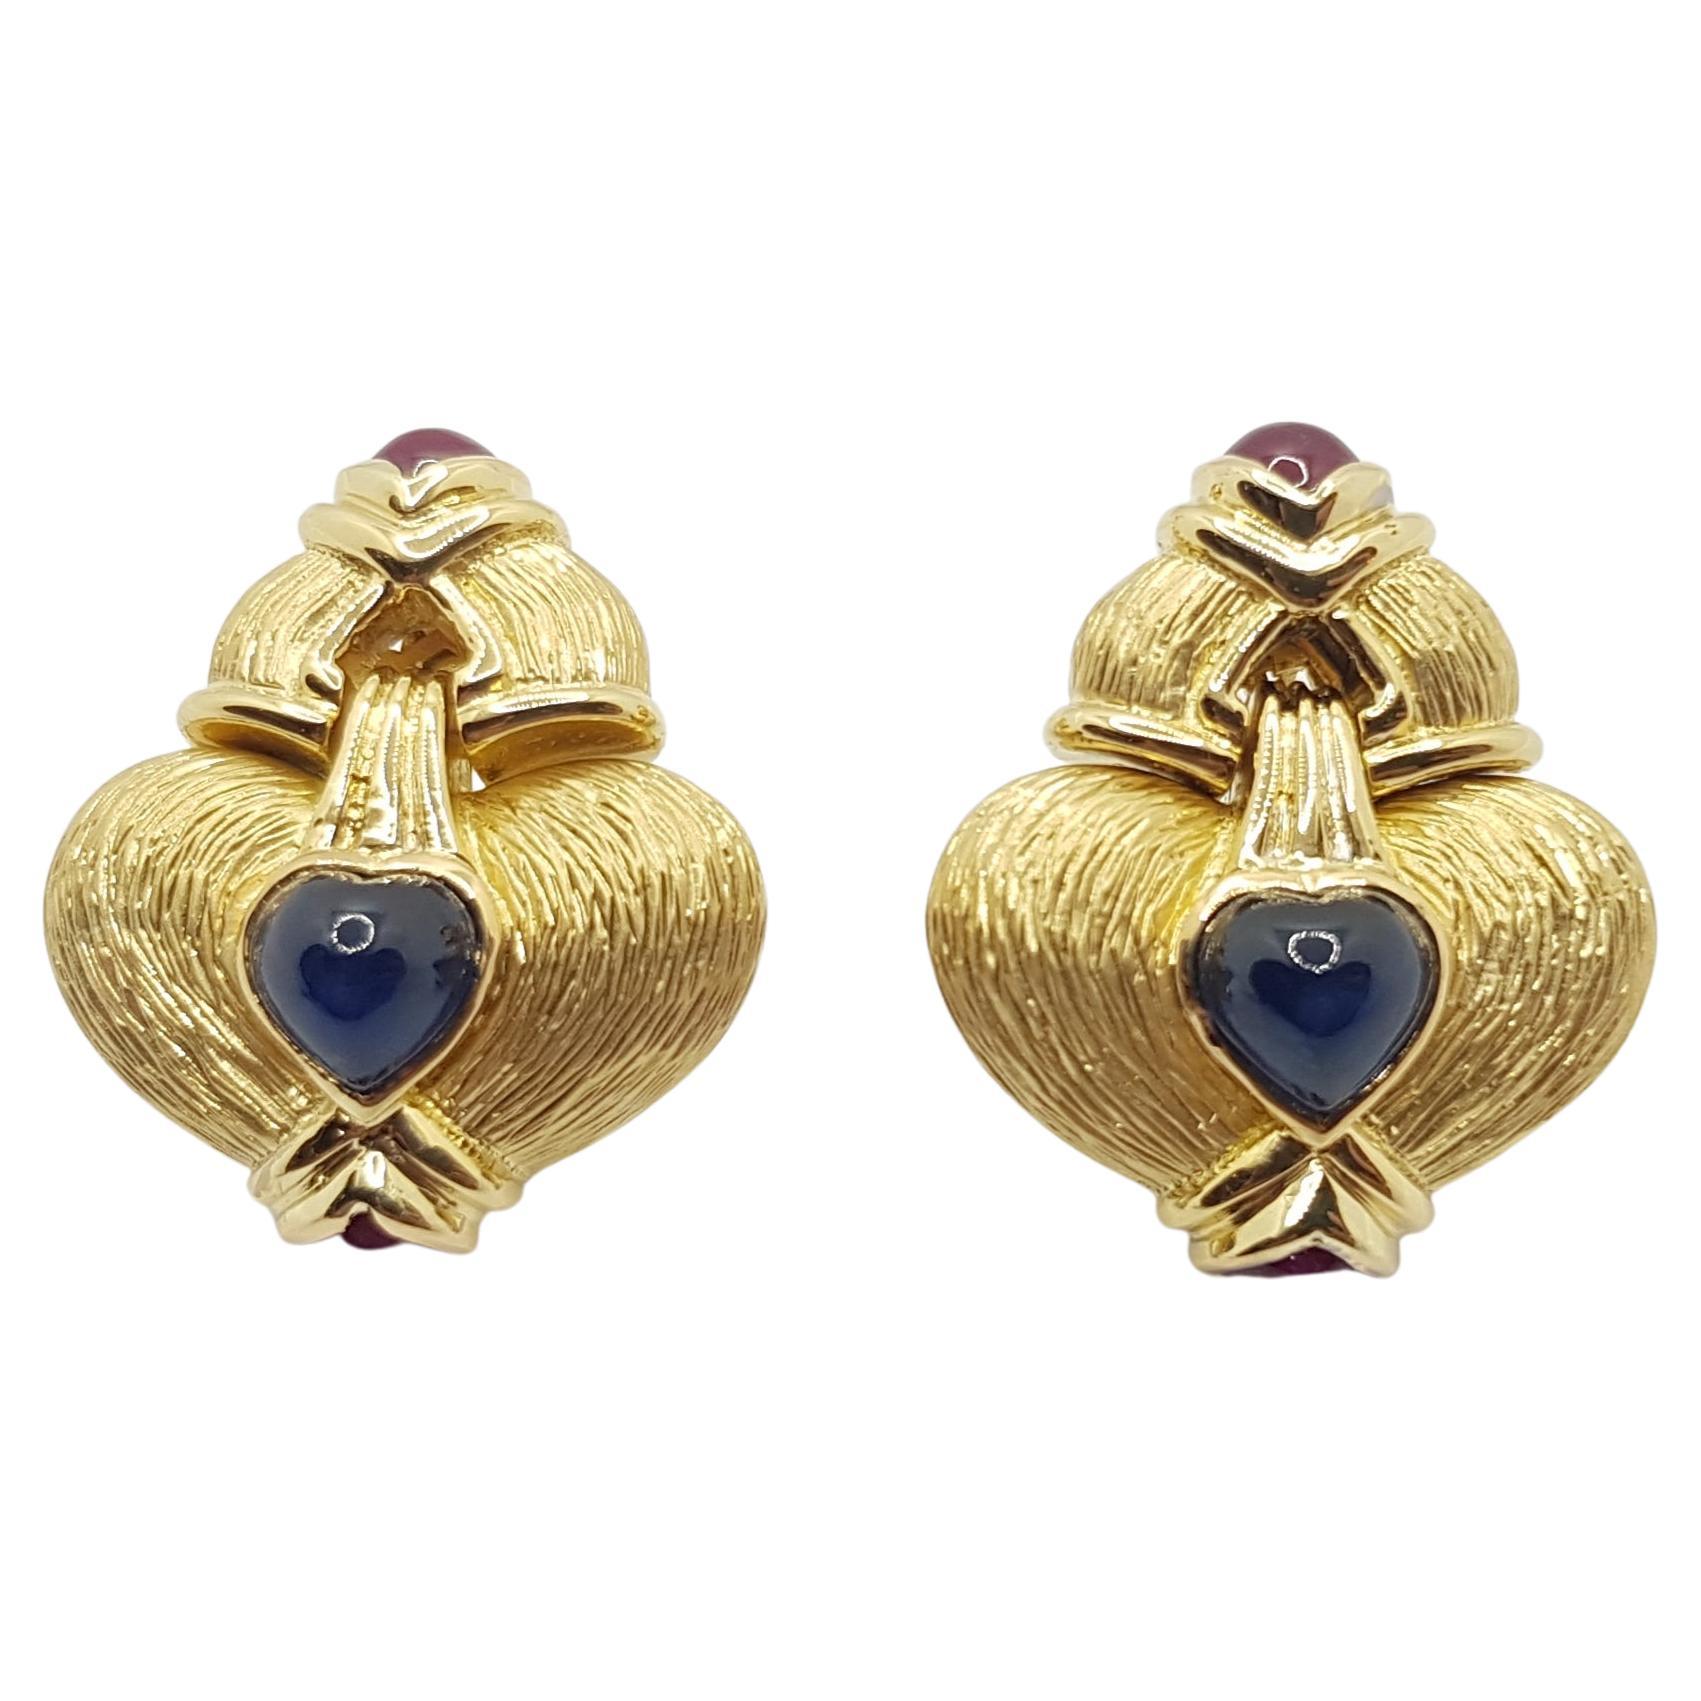 Cabochon Ruby with Cabochon Blue Sapphire Earrings Set in 18 Karat Gold Settings